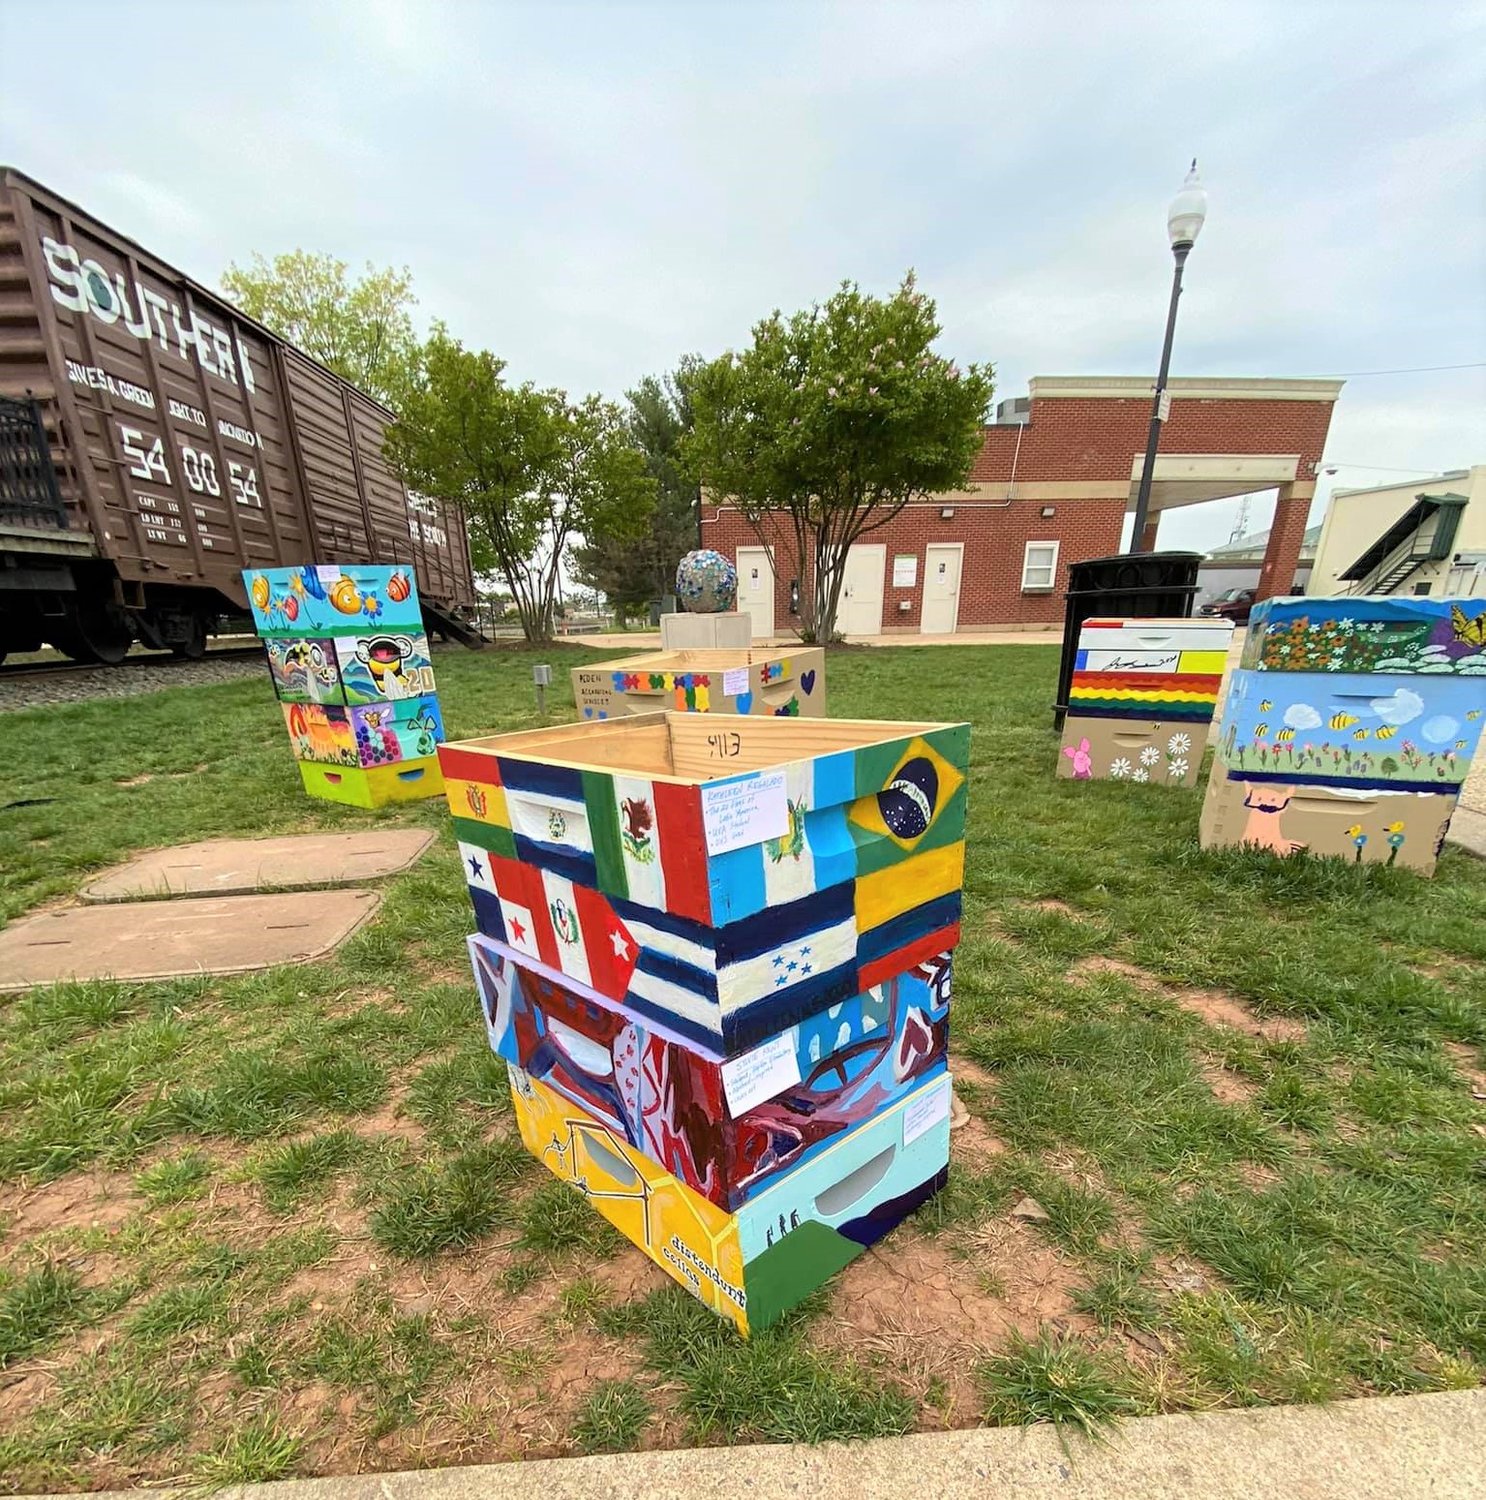 Bee Box in the city of Manassas is brightly decorated as part of a beautification effort.